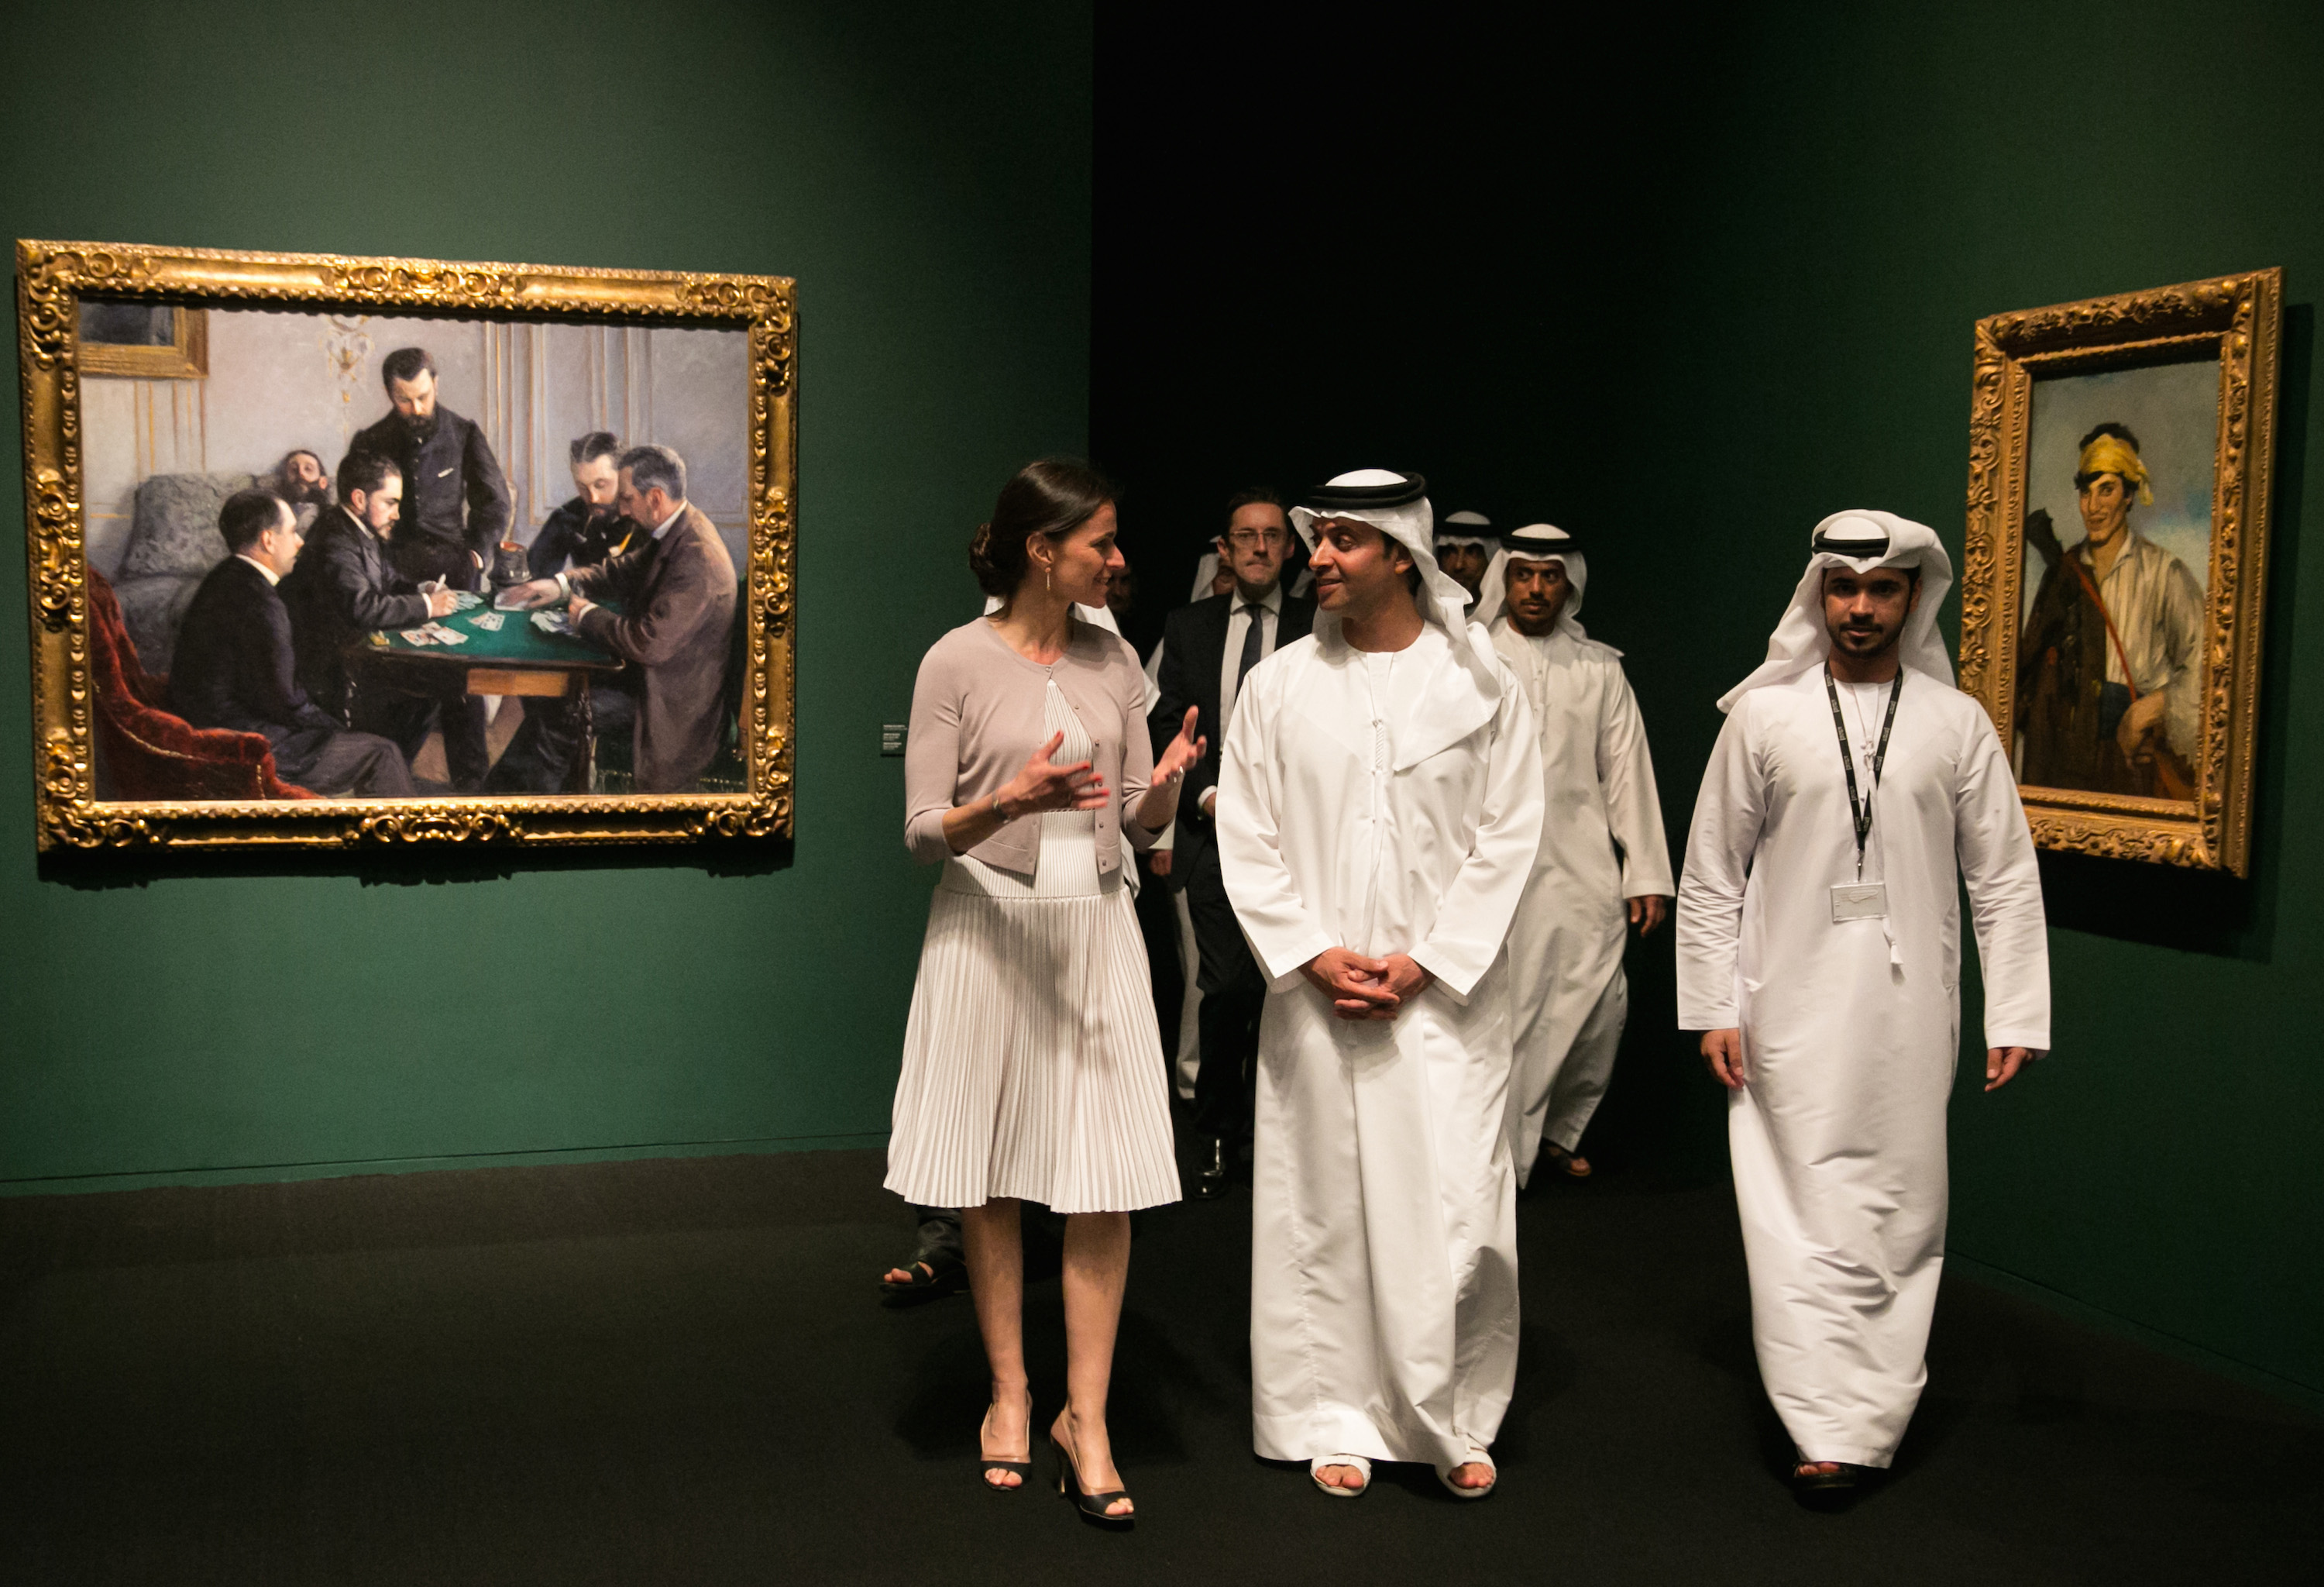 Aurélie Filippetti, former French culture minister, and His Highness Hazza bin Zayed bin Sultan Al Nahyan, national security adviser and vice chairman of the Abu Dhabi Executive Council, at the opening of “Birth of a Museum.” Saadiyat Island, Abu Dhabi. 2013.